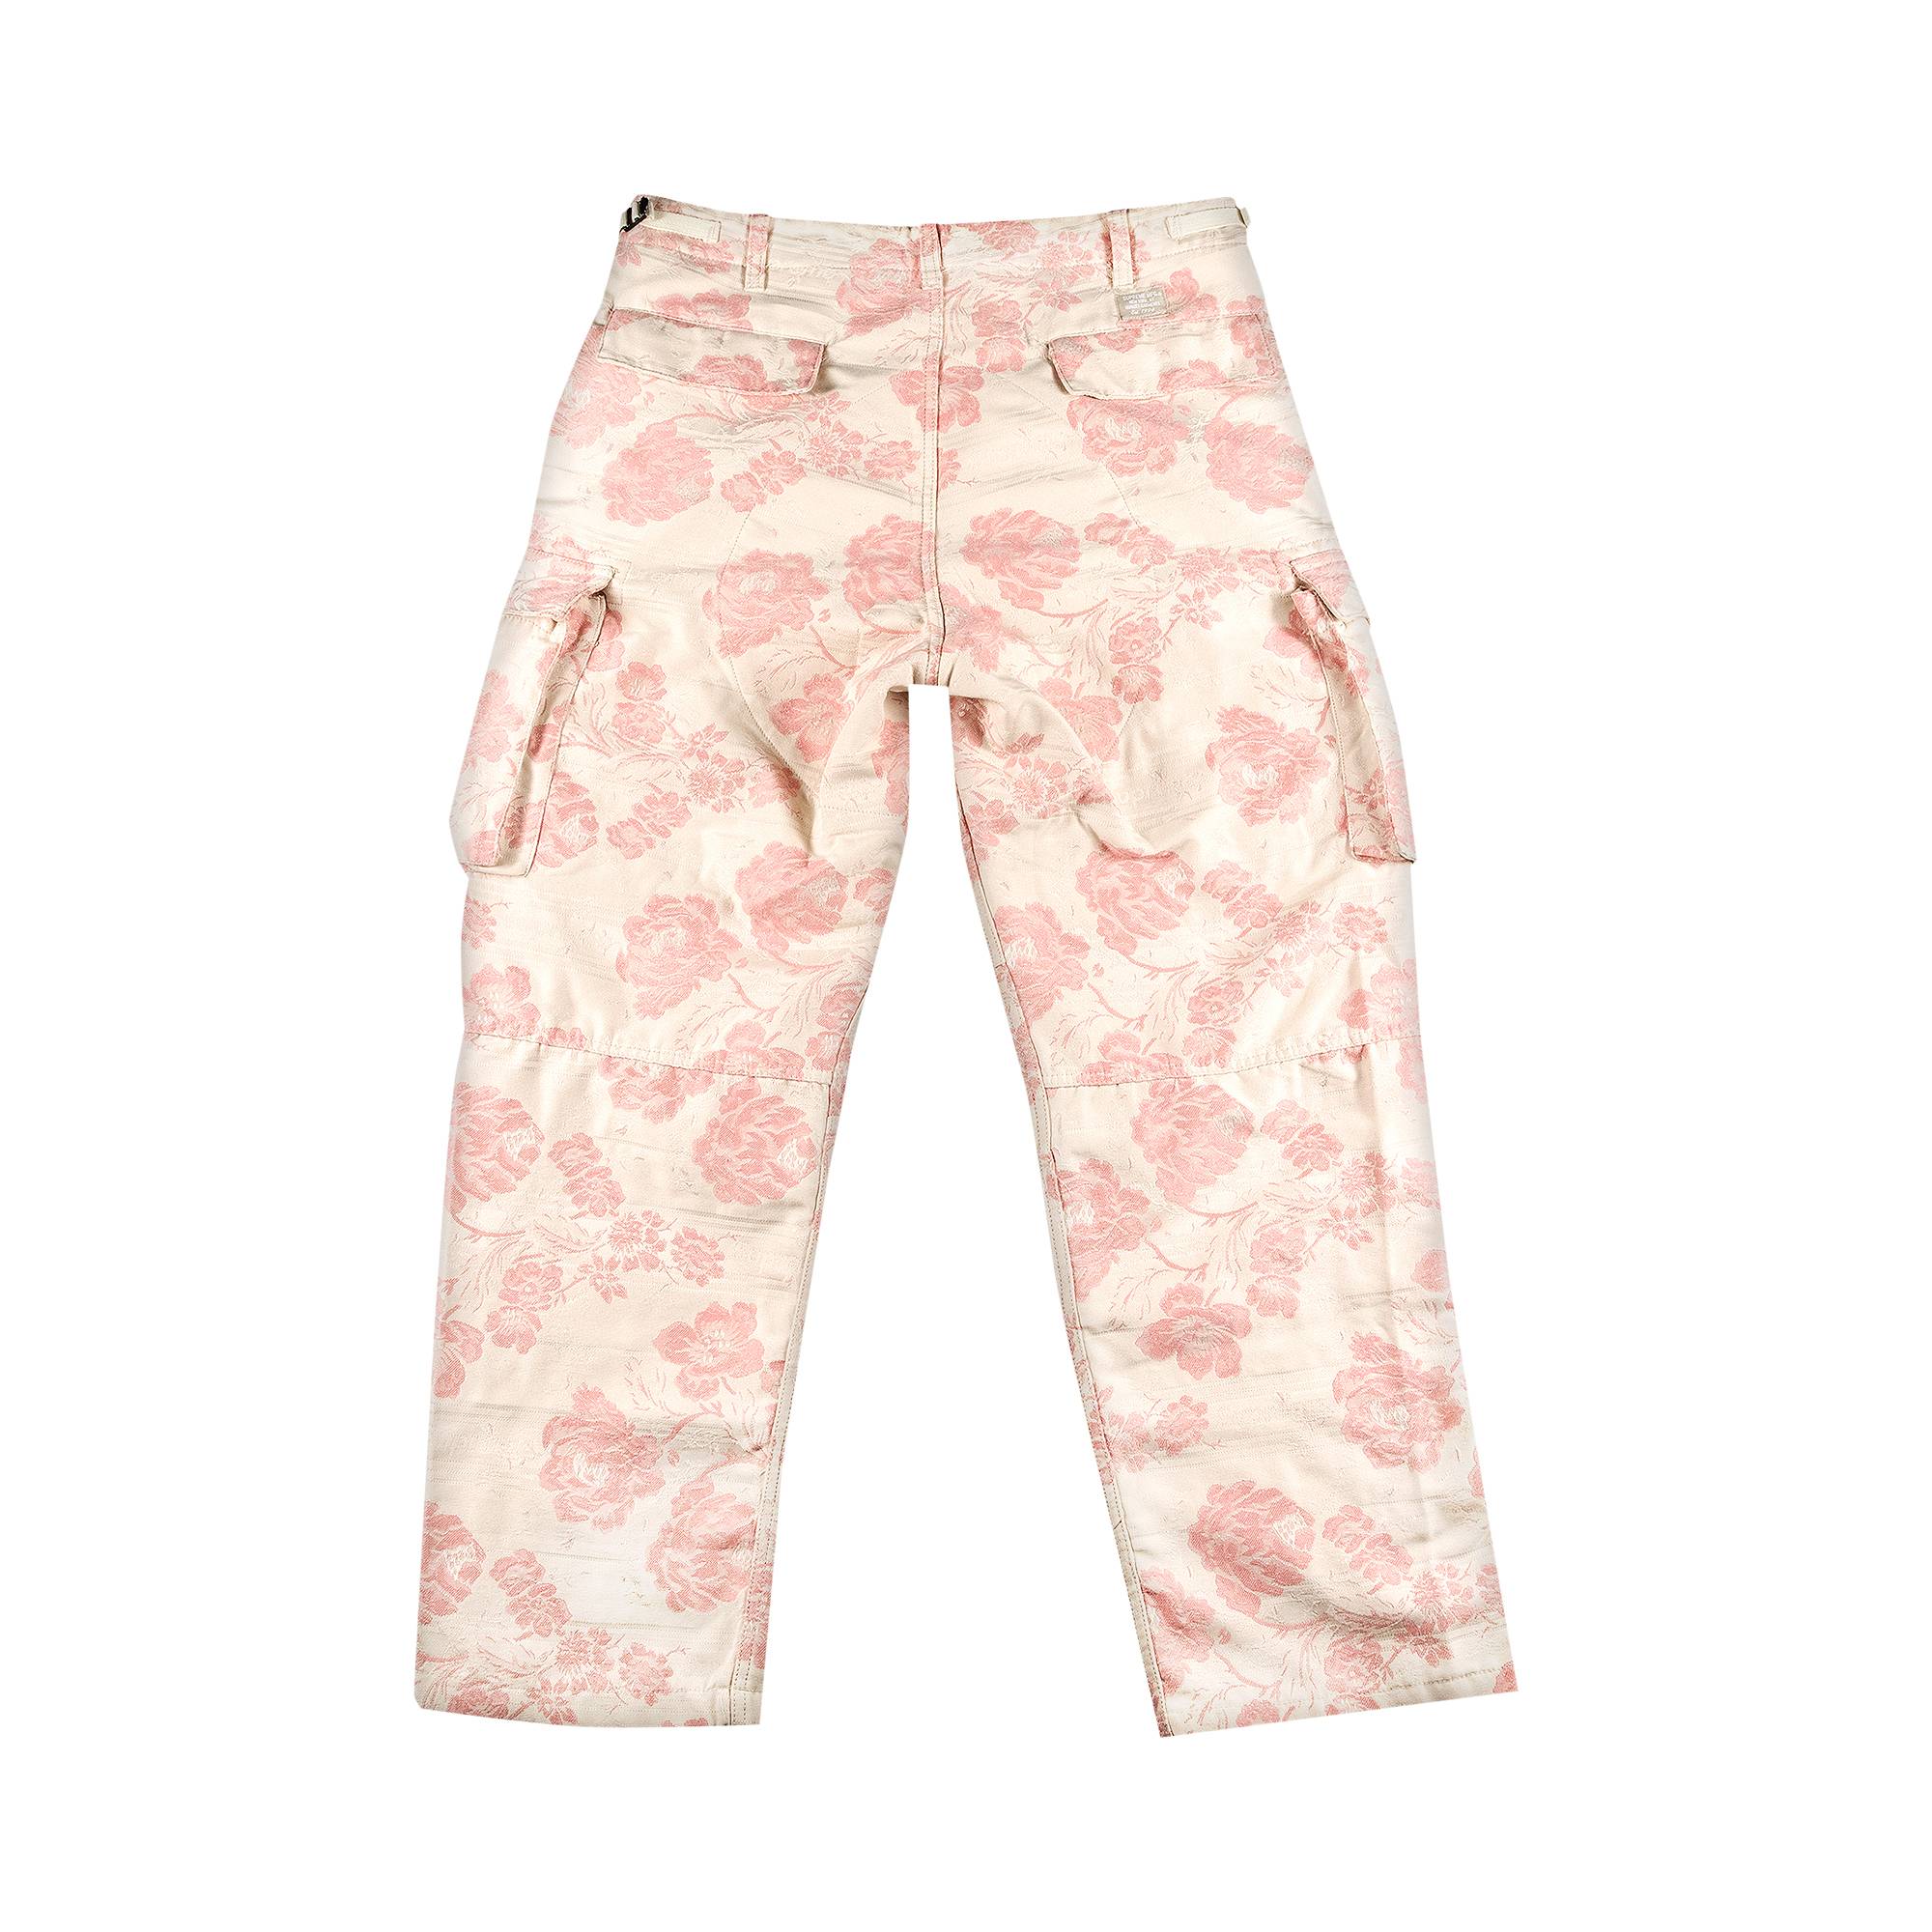 Supreme Floral Tapestry Cargo Pant 'Pink' - Supreme - SS21P28 PINK | GOAT